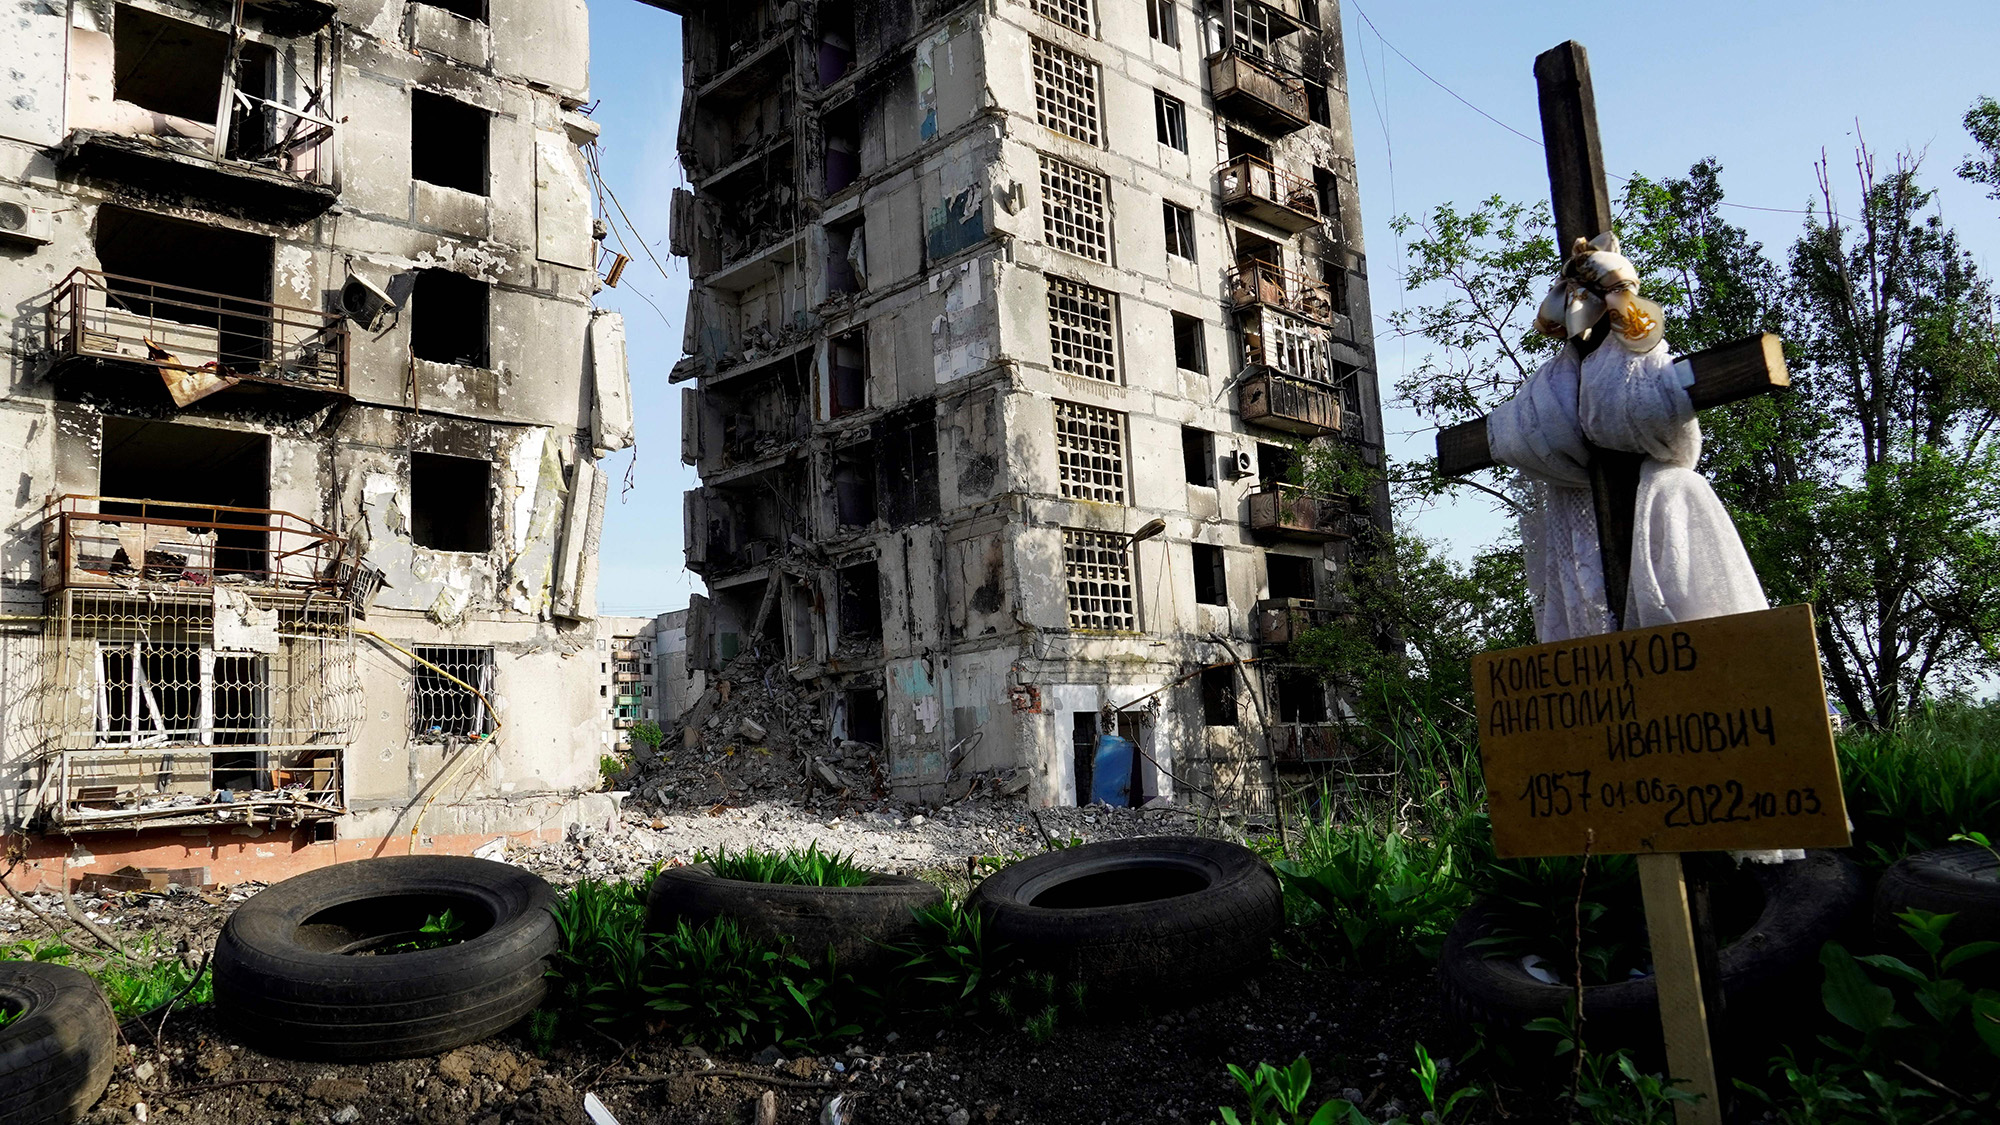 A grave is pictured in front of destroyed residential buildings in Mariupol, Ukraine, on May 31.